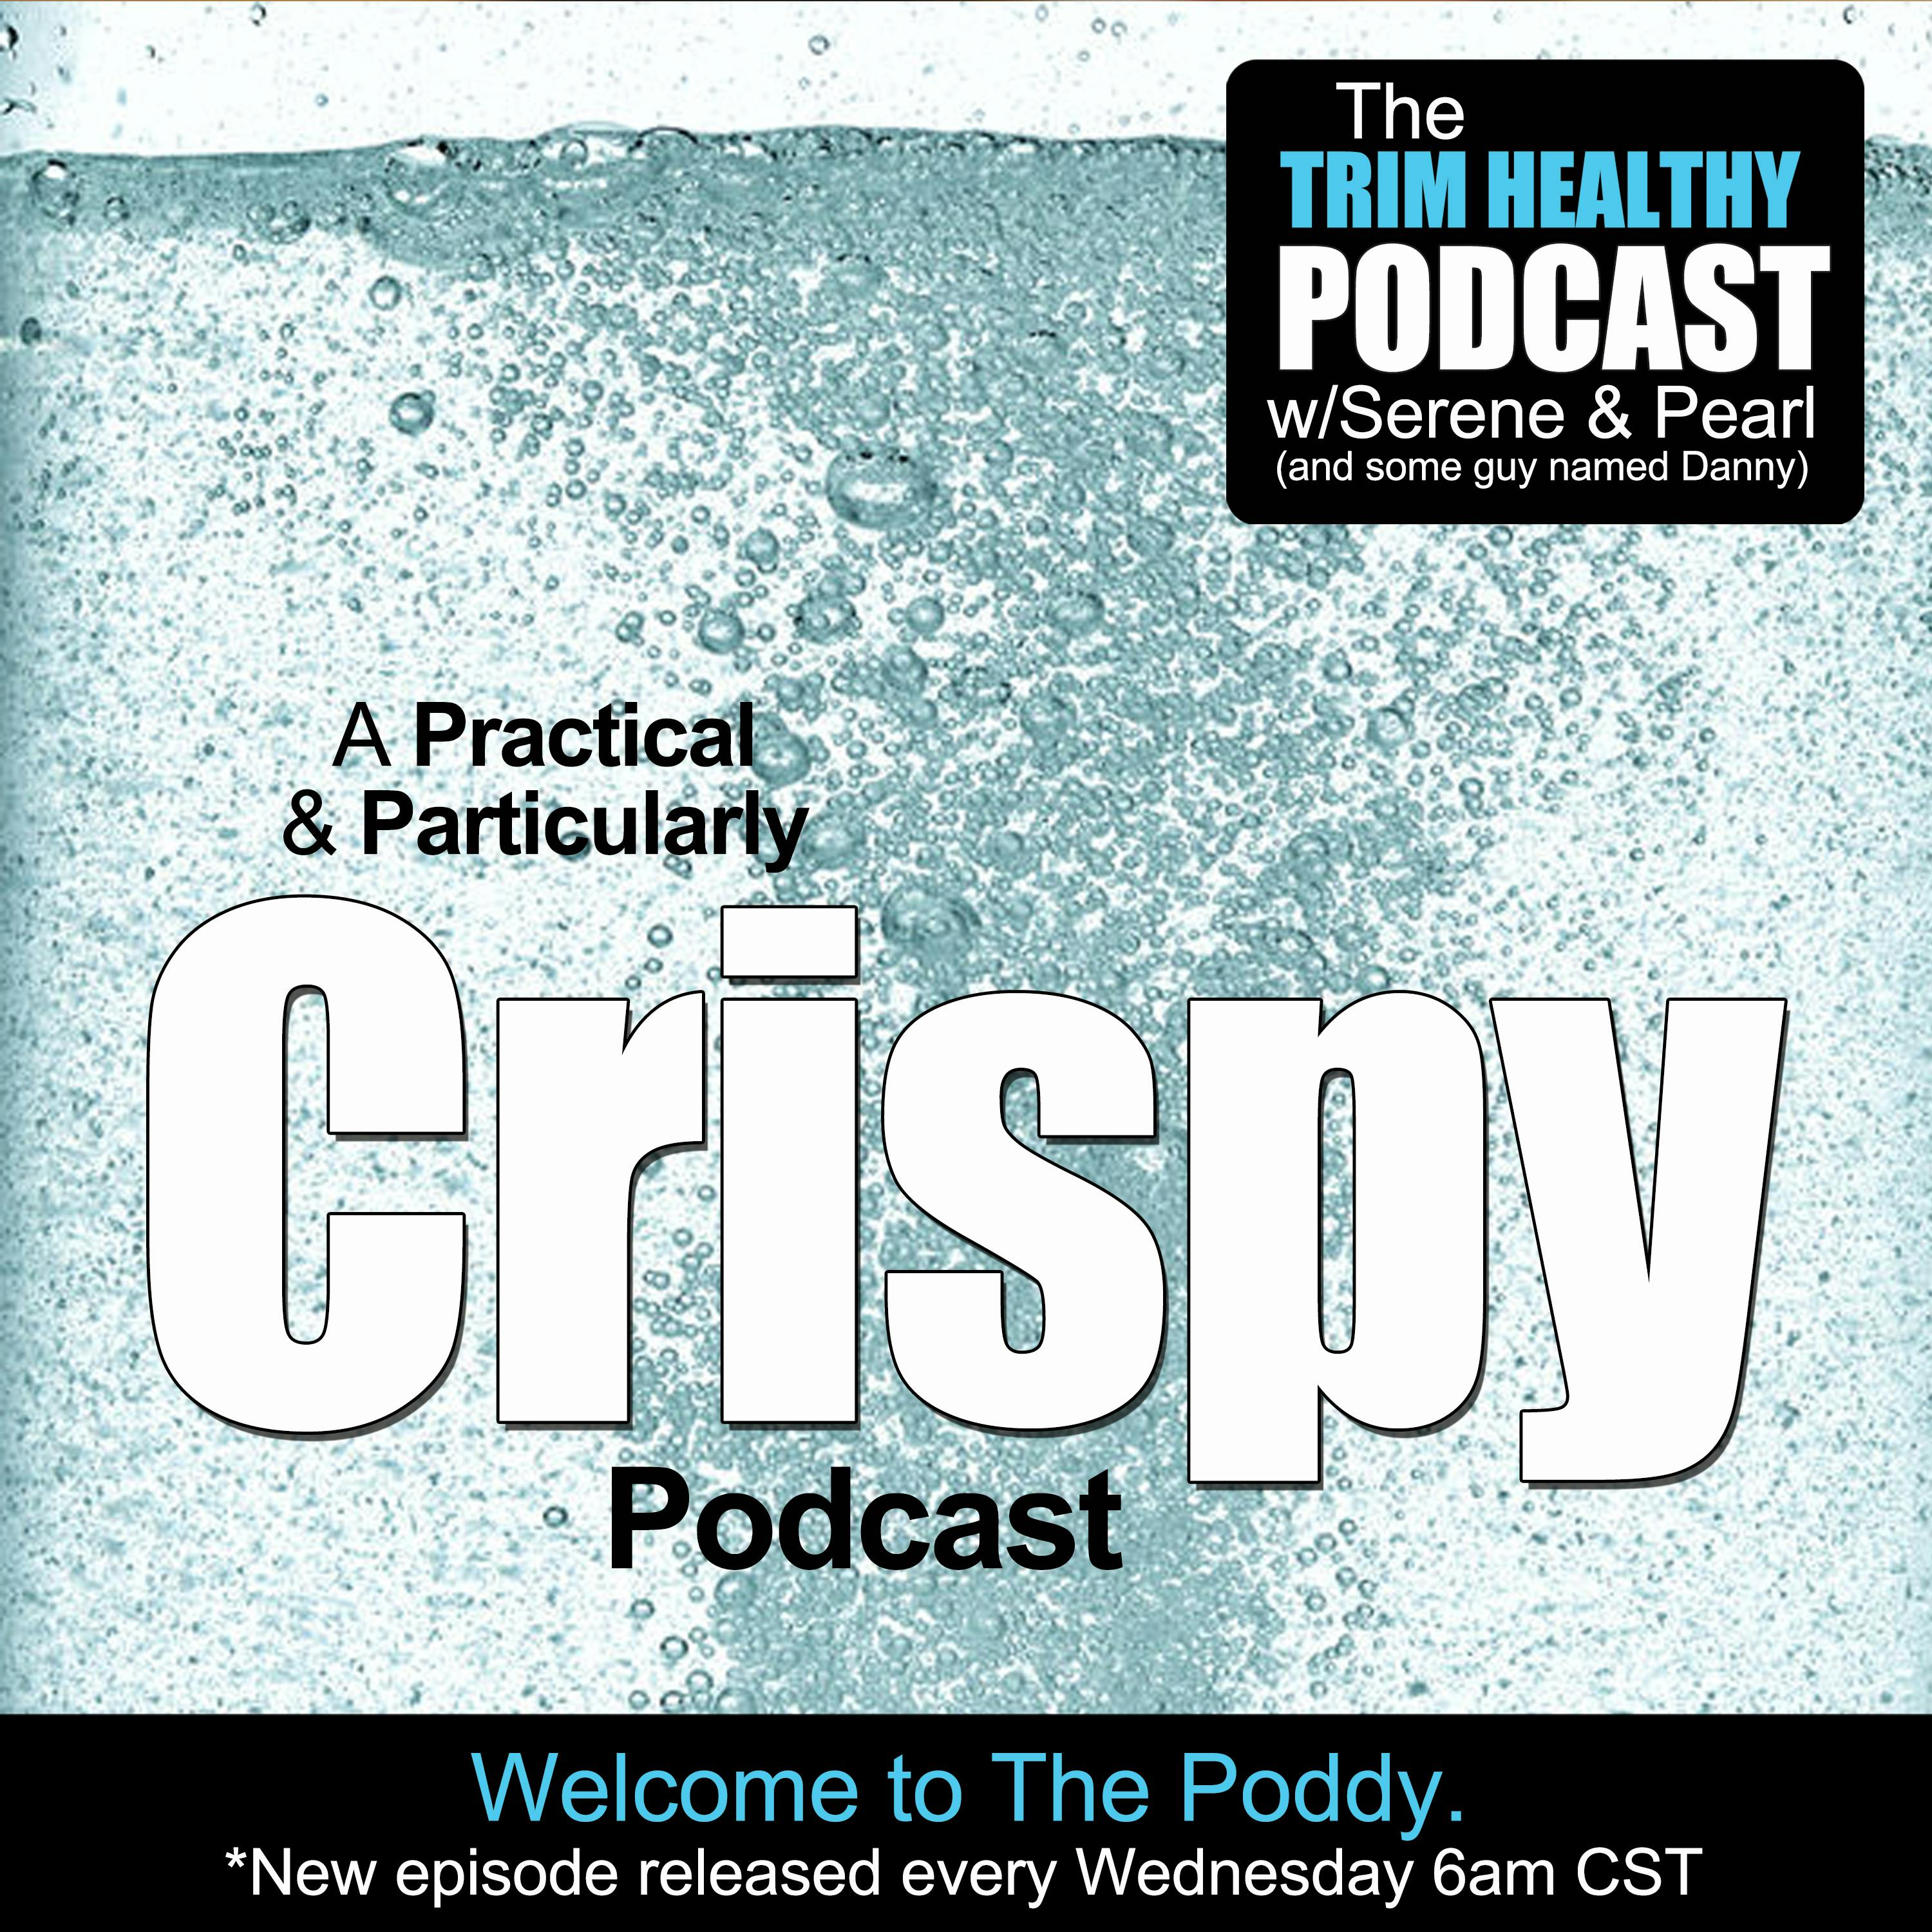 Ep 179: A Practical & Particularly Crispy Podcast